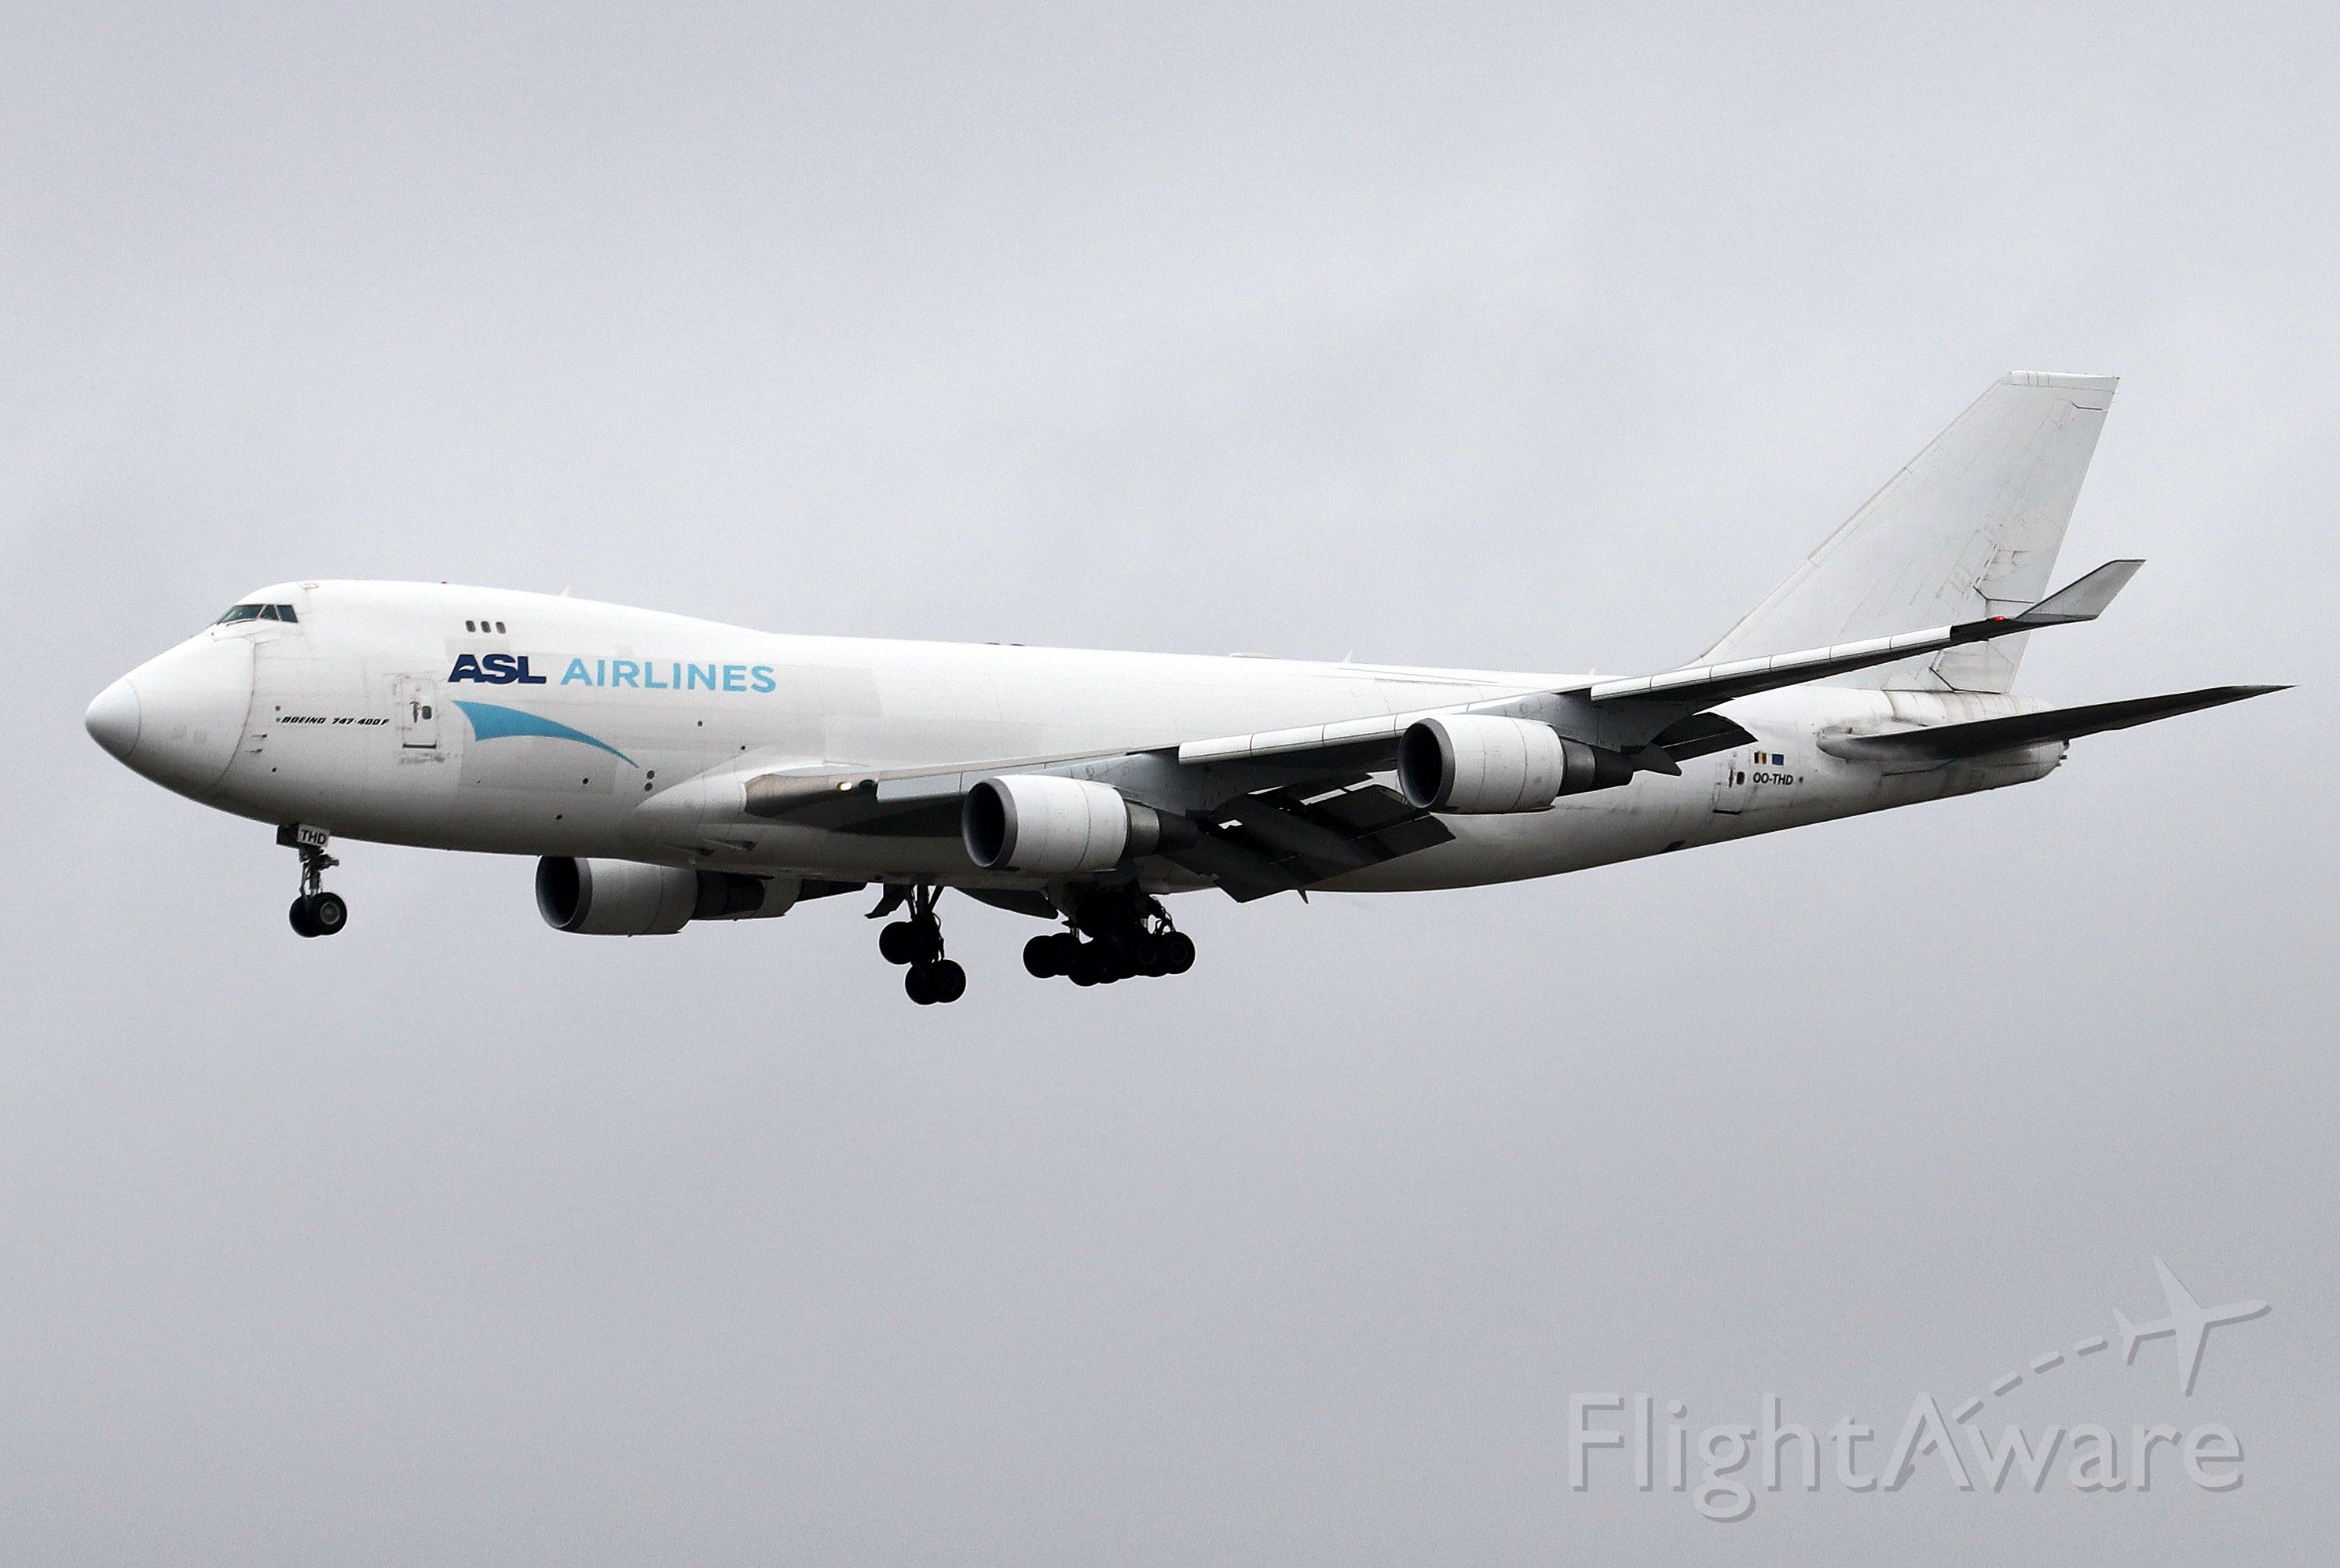 Boeing 747-400 (OO-THD) - 'Quality 10' from Belgium inbound to 22L